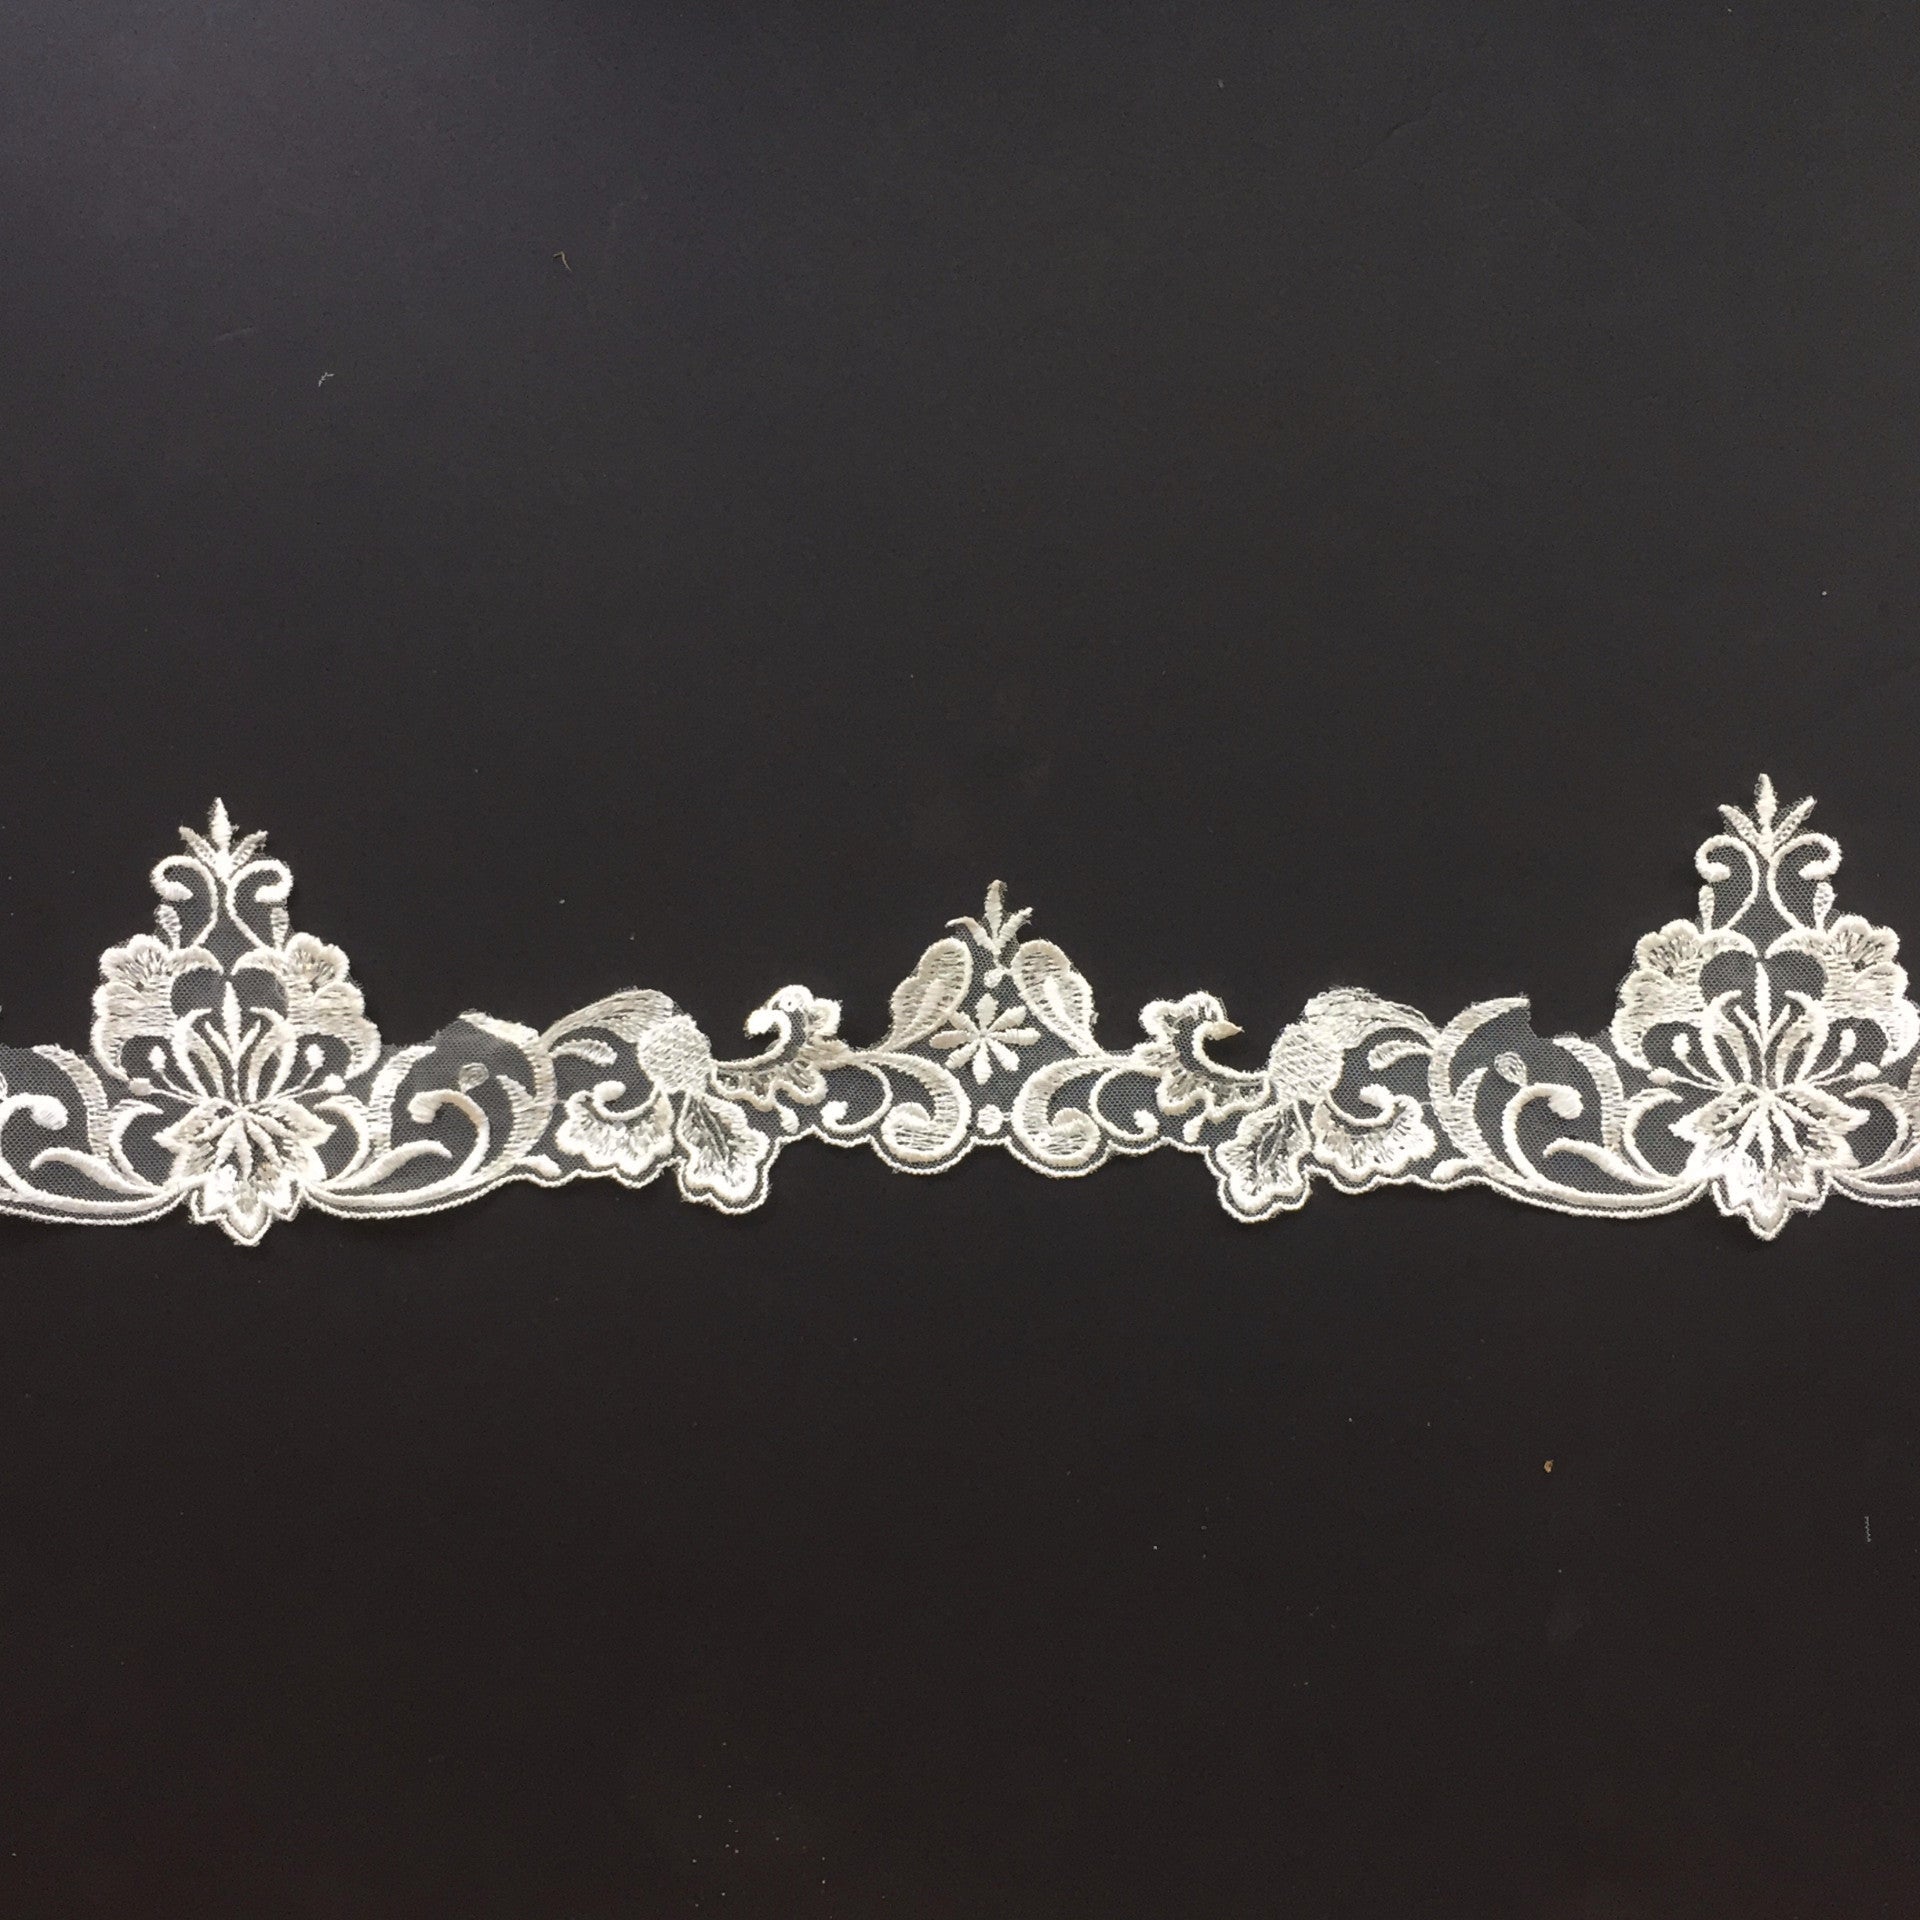 Ivory floral lace trim embellished with sequins, great for costumes and as a bridal veil trim